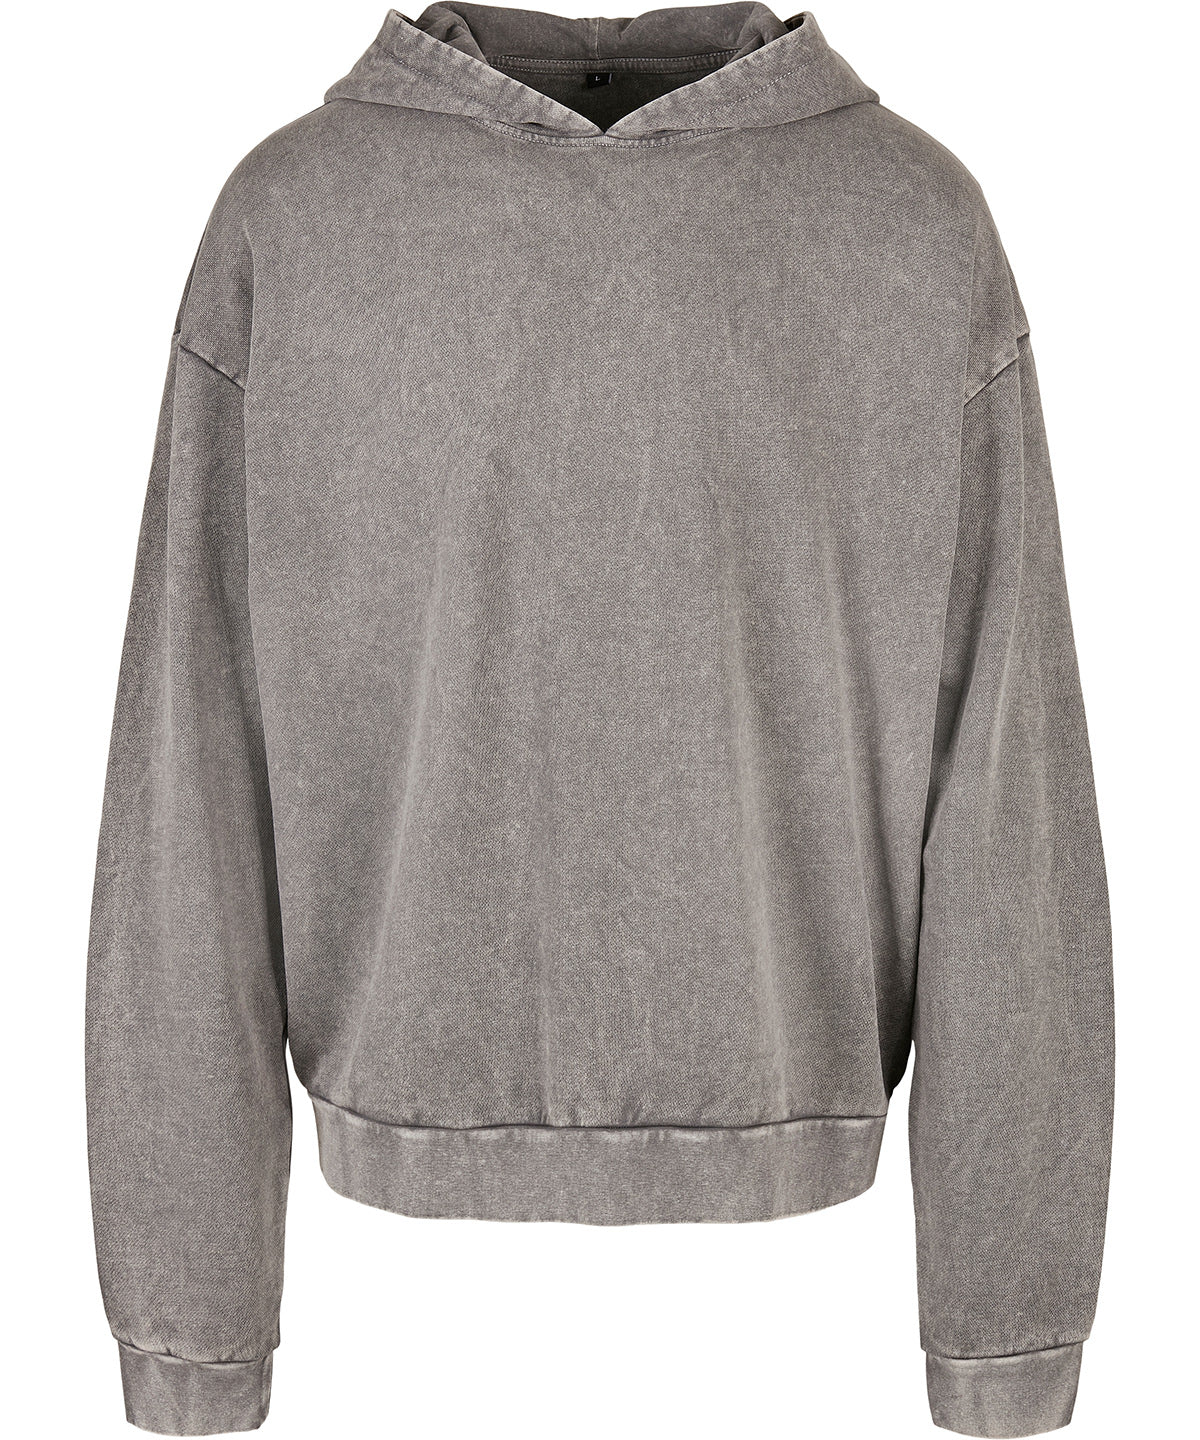 Personalised Hoodies - Mid Grey Build Your Brand Acid washed oversize hoodie